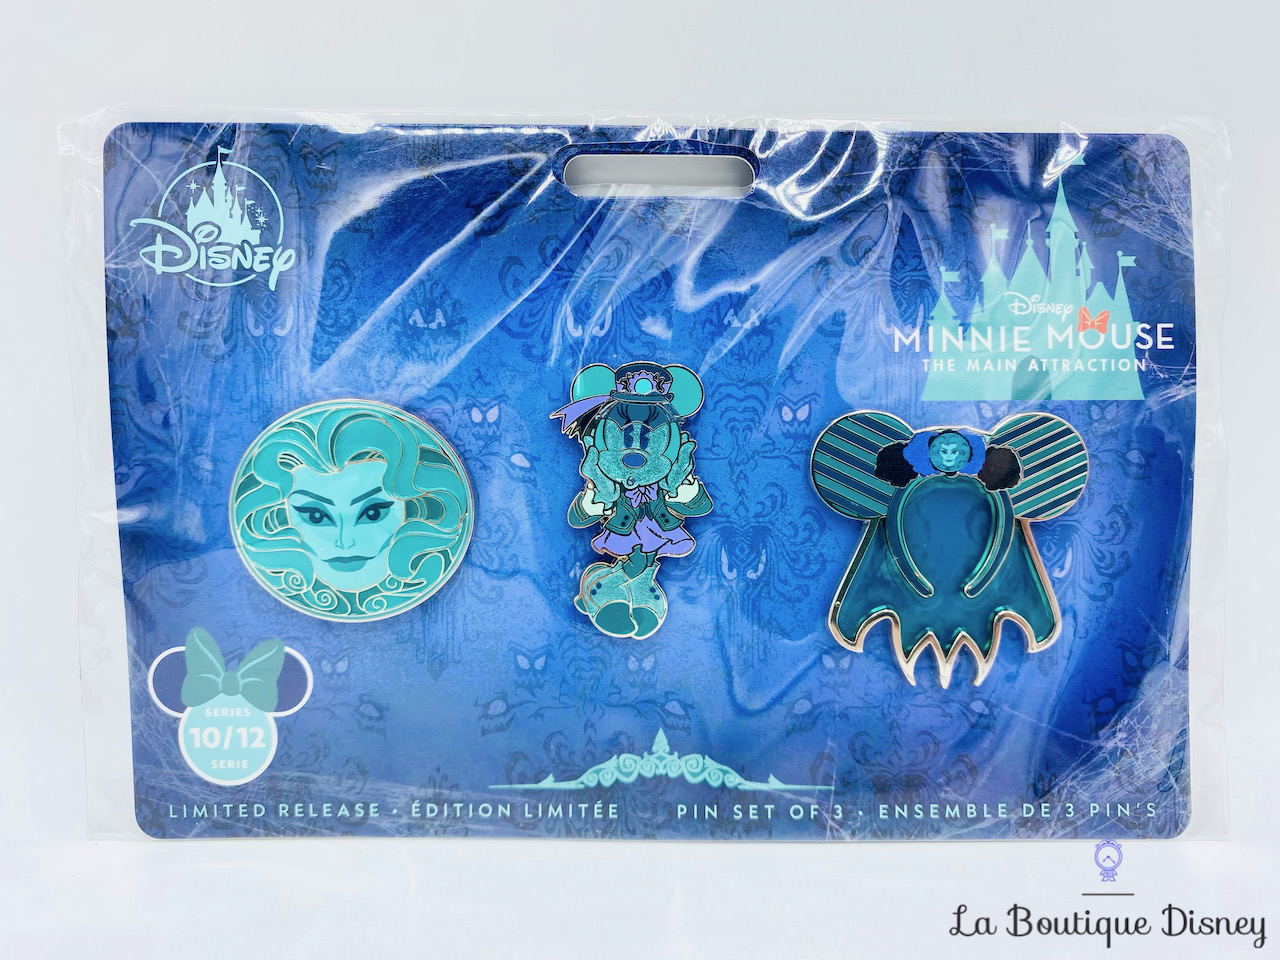 Pin-Minnie-Mouse-The-Main-Attraction-The-Haunted-Mansion-Series-10/12-Édition-limitée-Disney-Store-2020-140957